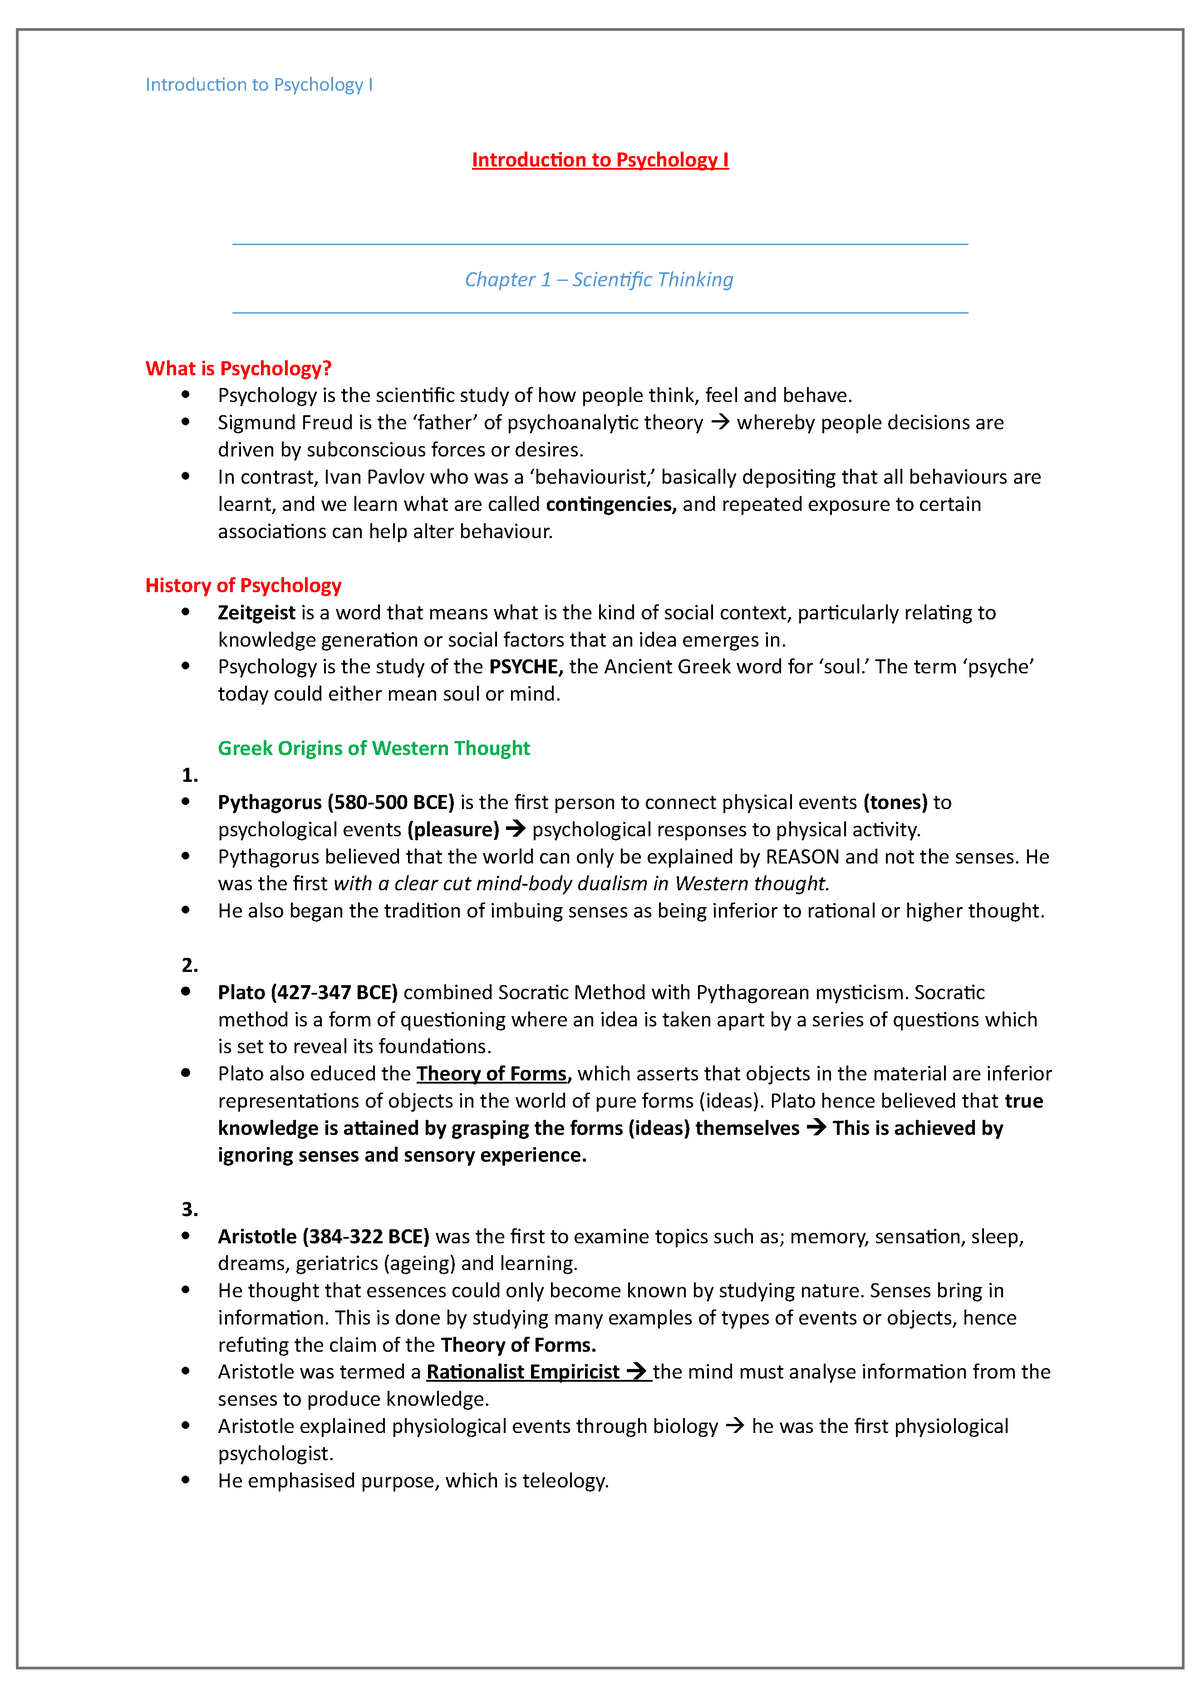 Introduction to psychology notes pdf download cnc programming software free download